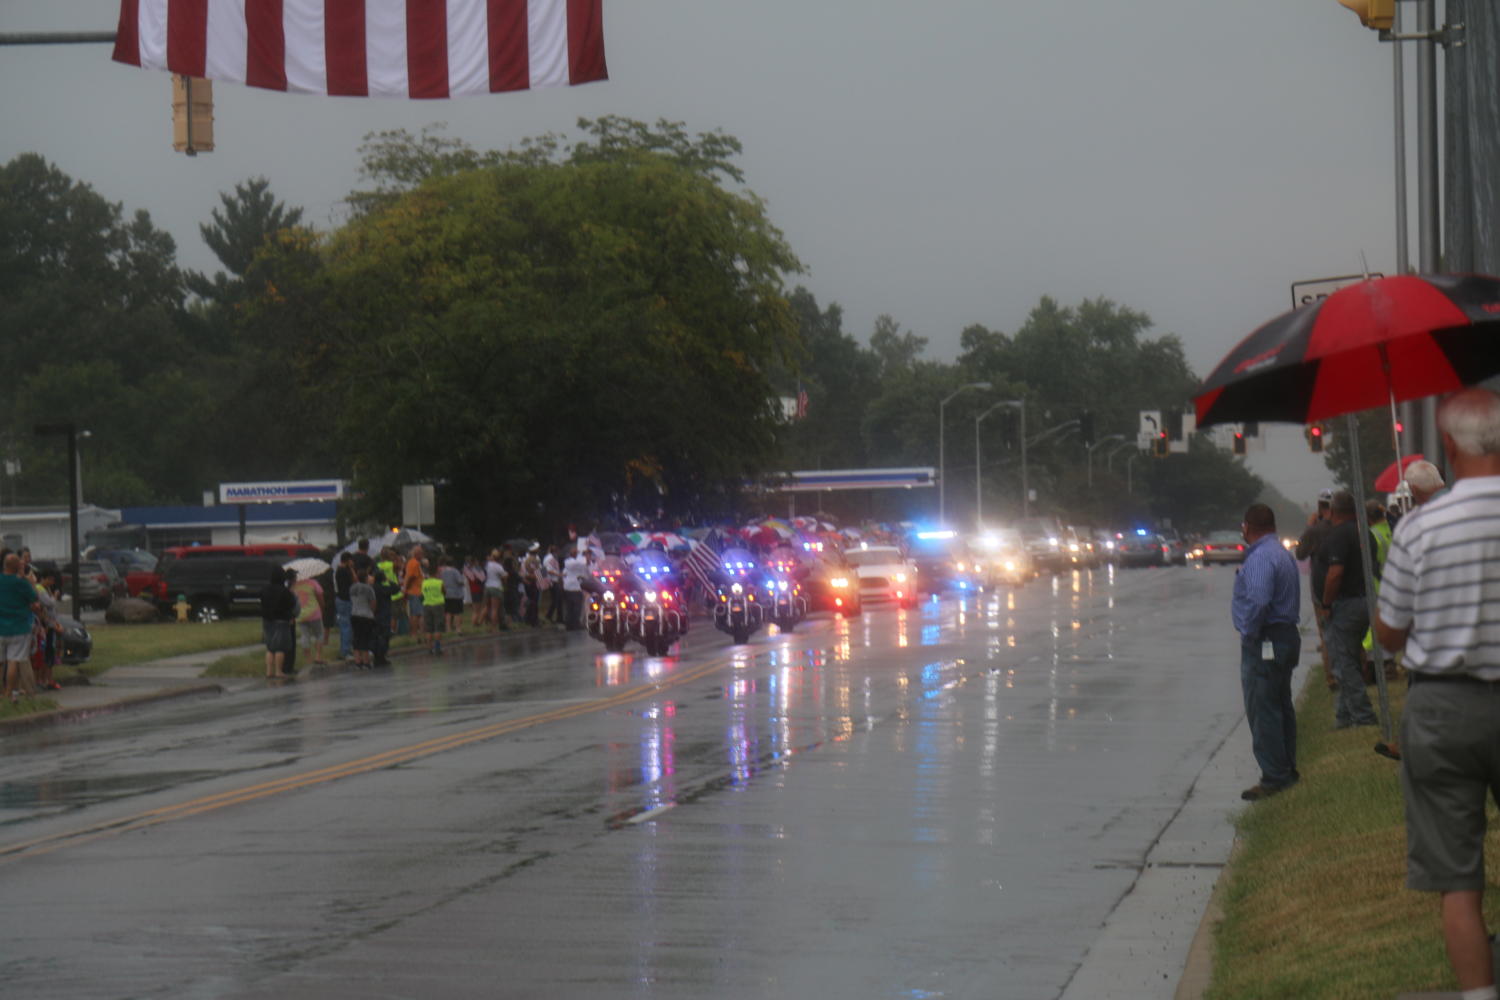 A break in the rain reveals the approach of Sgt. Hunters funeral procession.